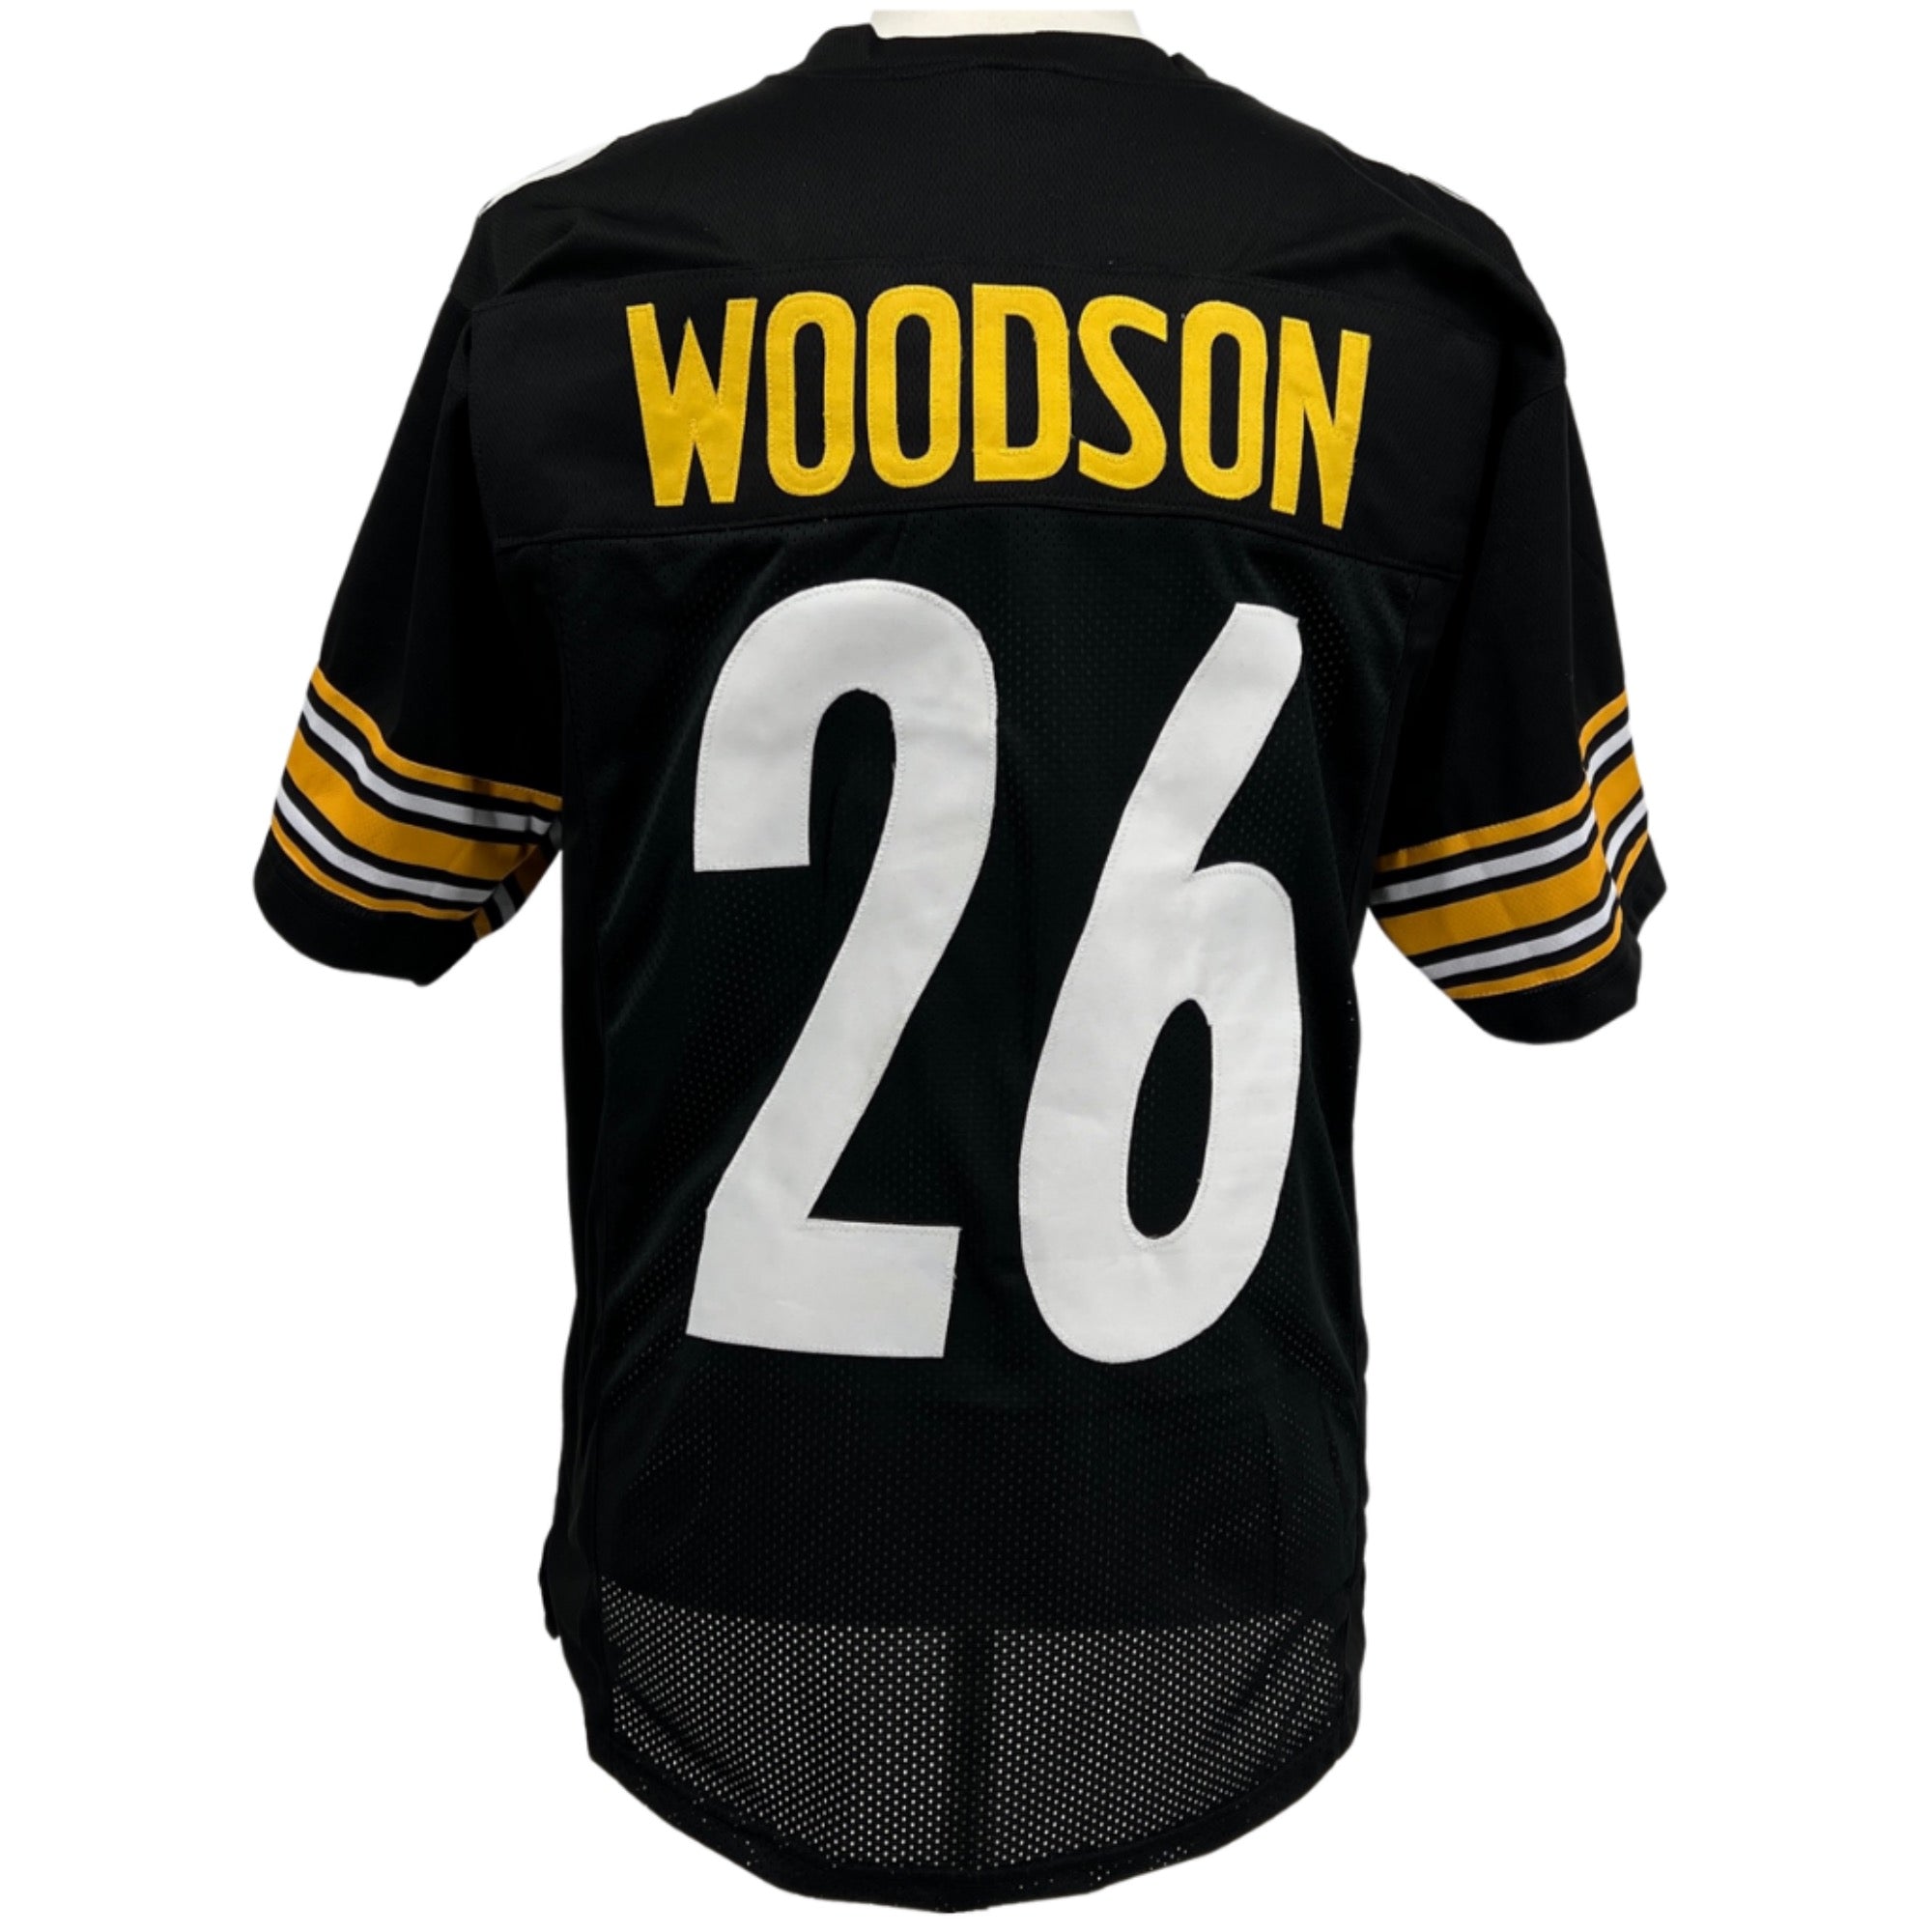 ROD WOODSON Pittsburgh Steelers BLACK Jersey M-5XL Unsigned Custom Sewn Stitched